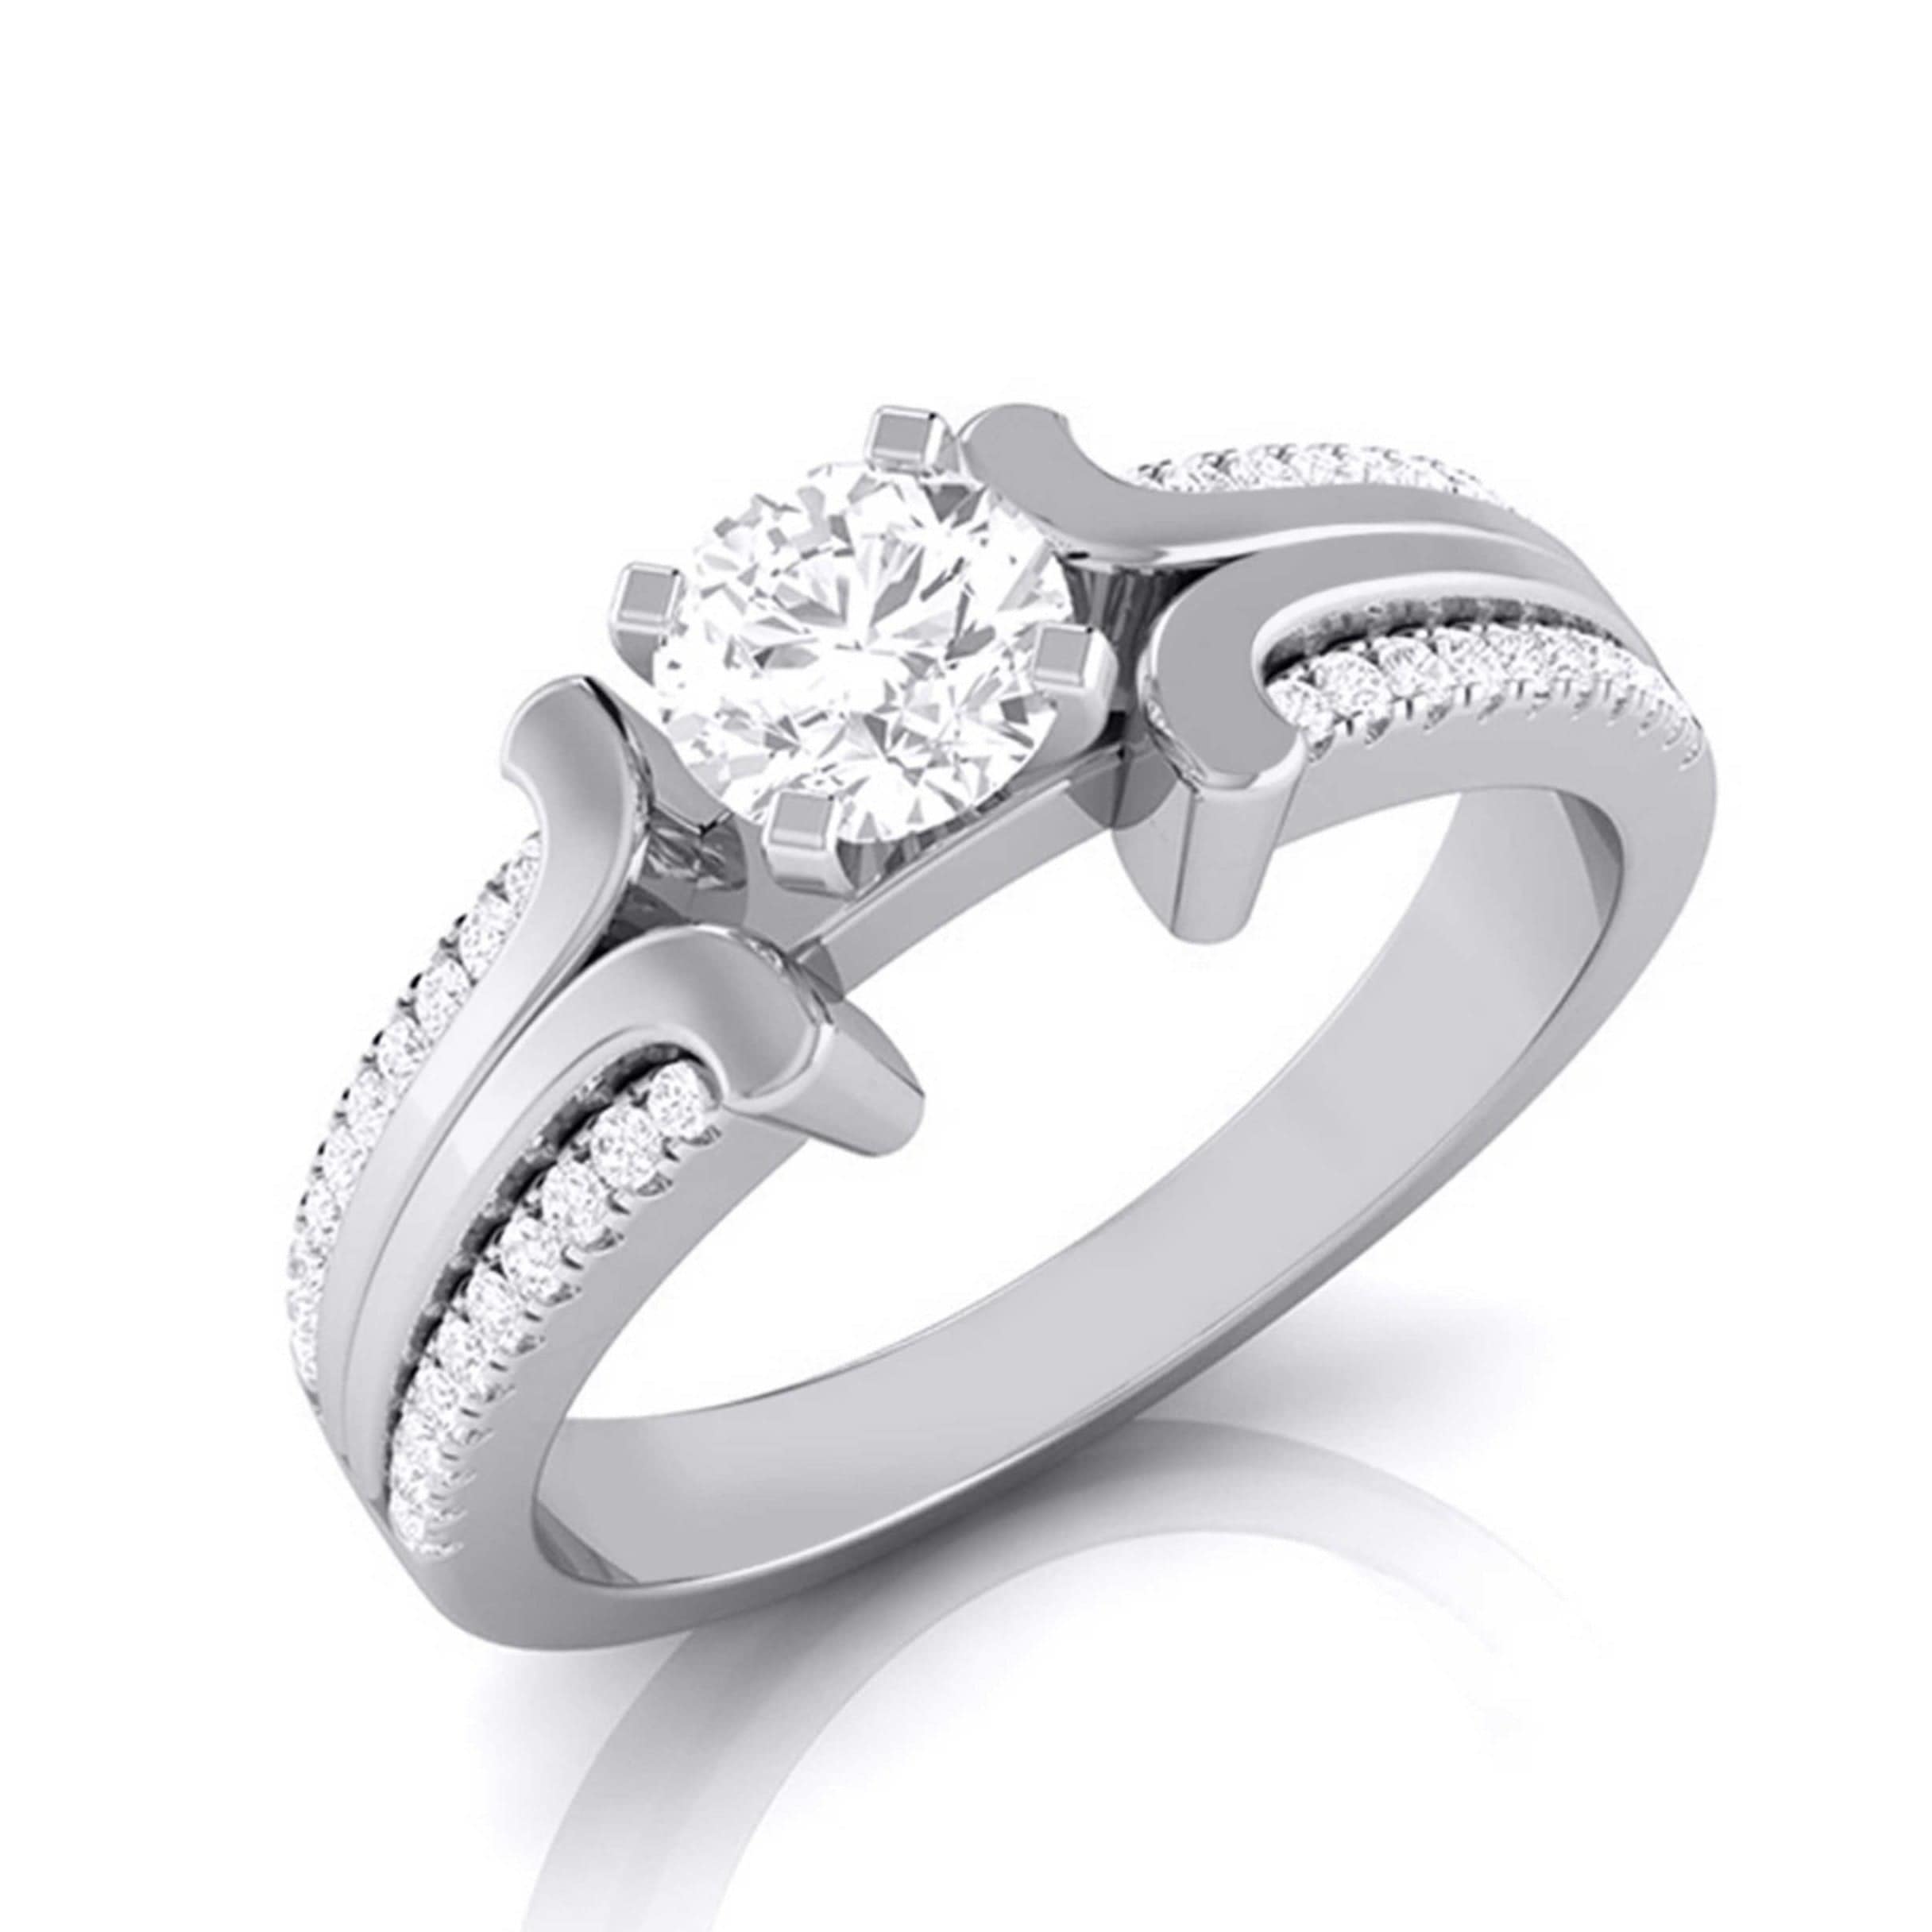 Buy Engagement Rings Online in India | Latest Designs at Best Price | PC  Jeweller